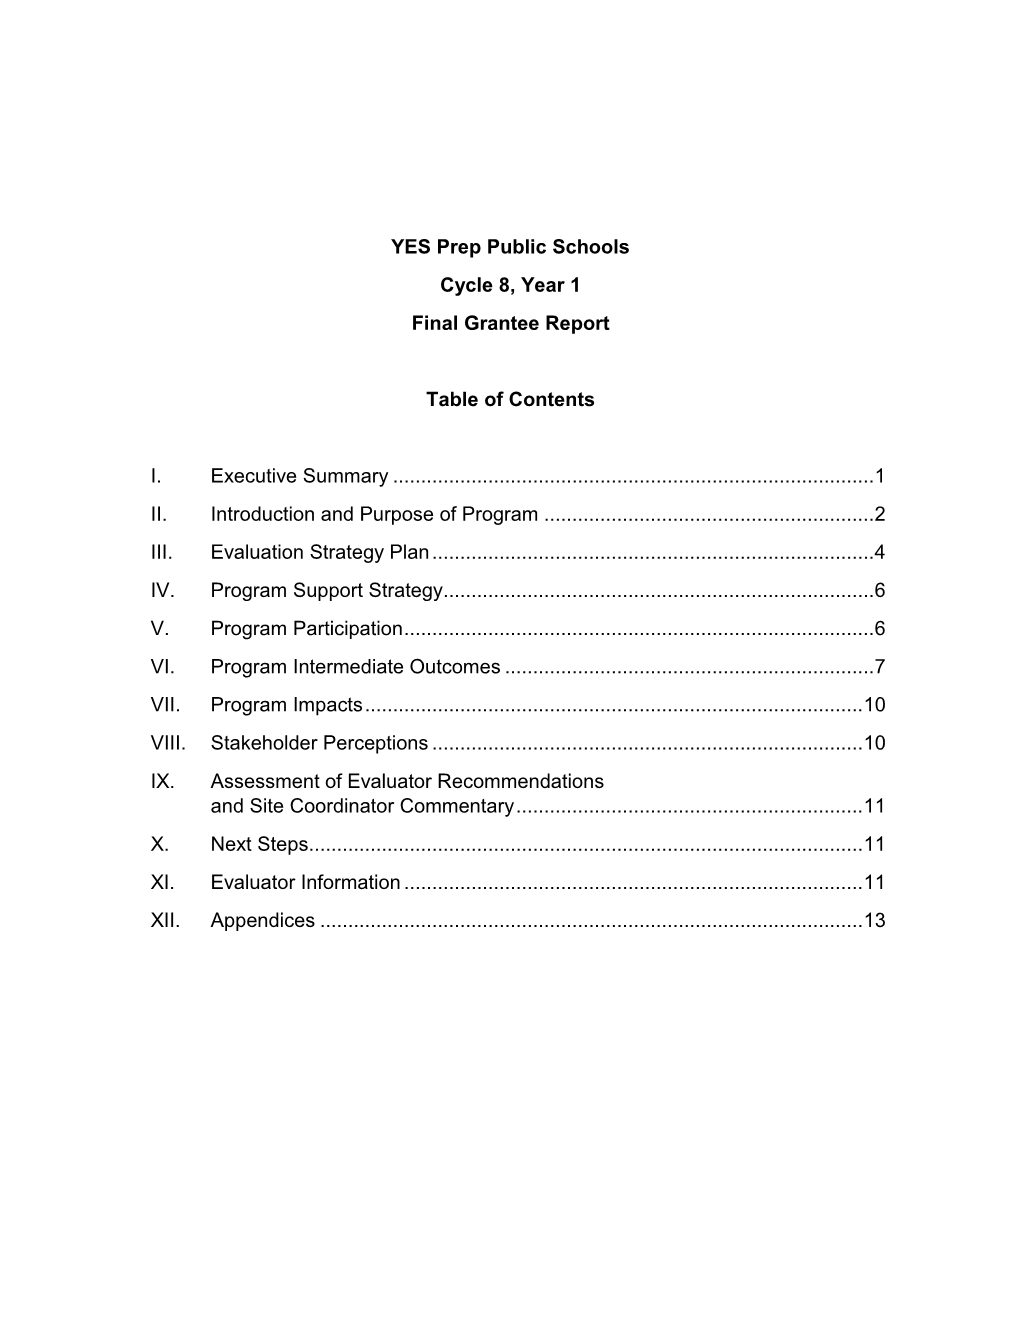 YES Prep Public Schools Cycle 8, Year 1 Final Grantee Report Table